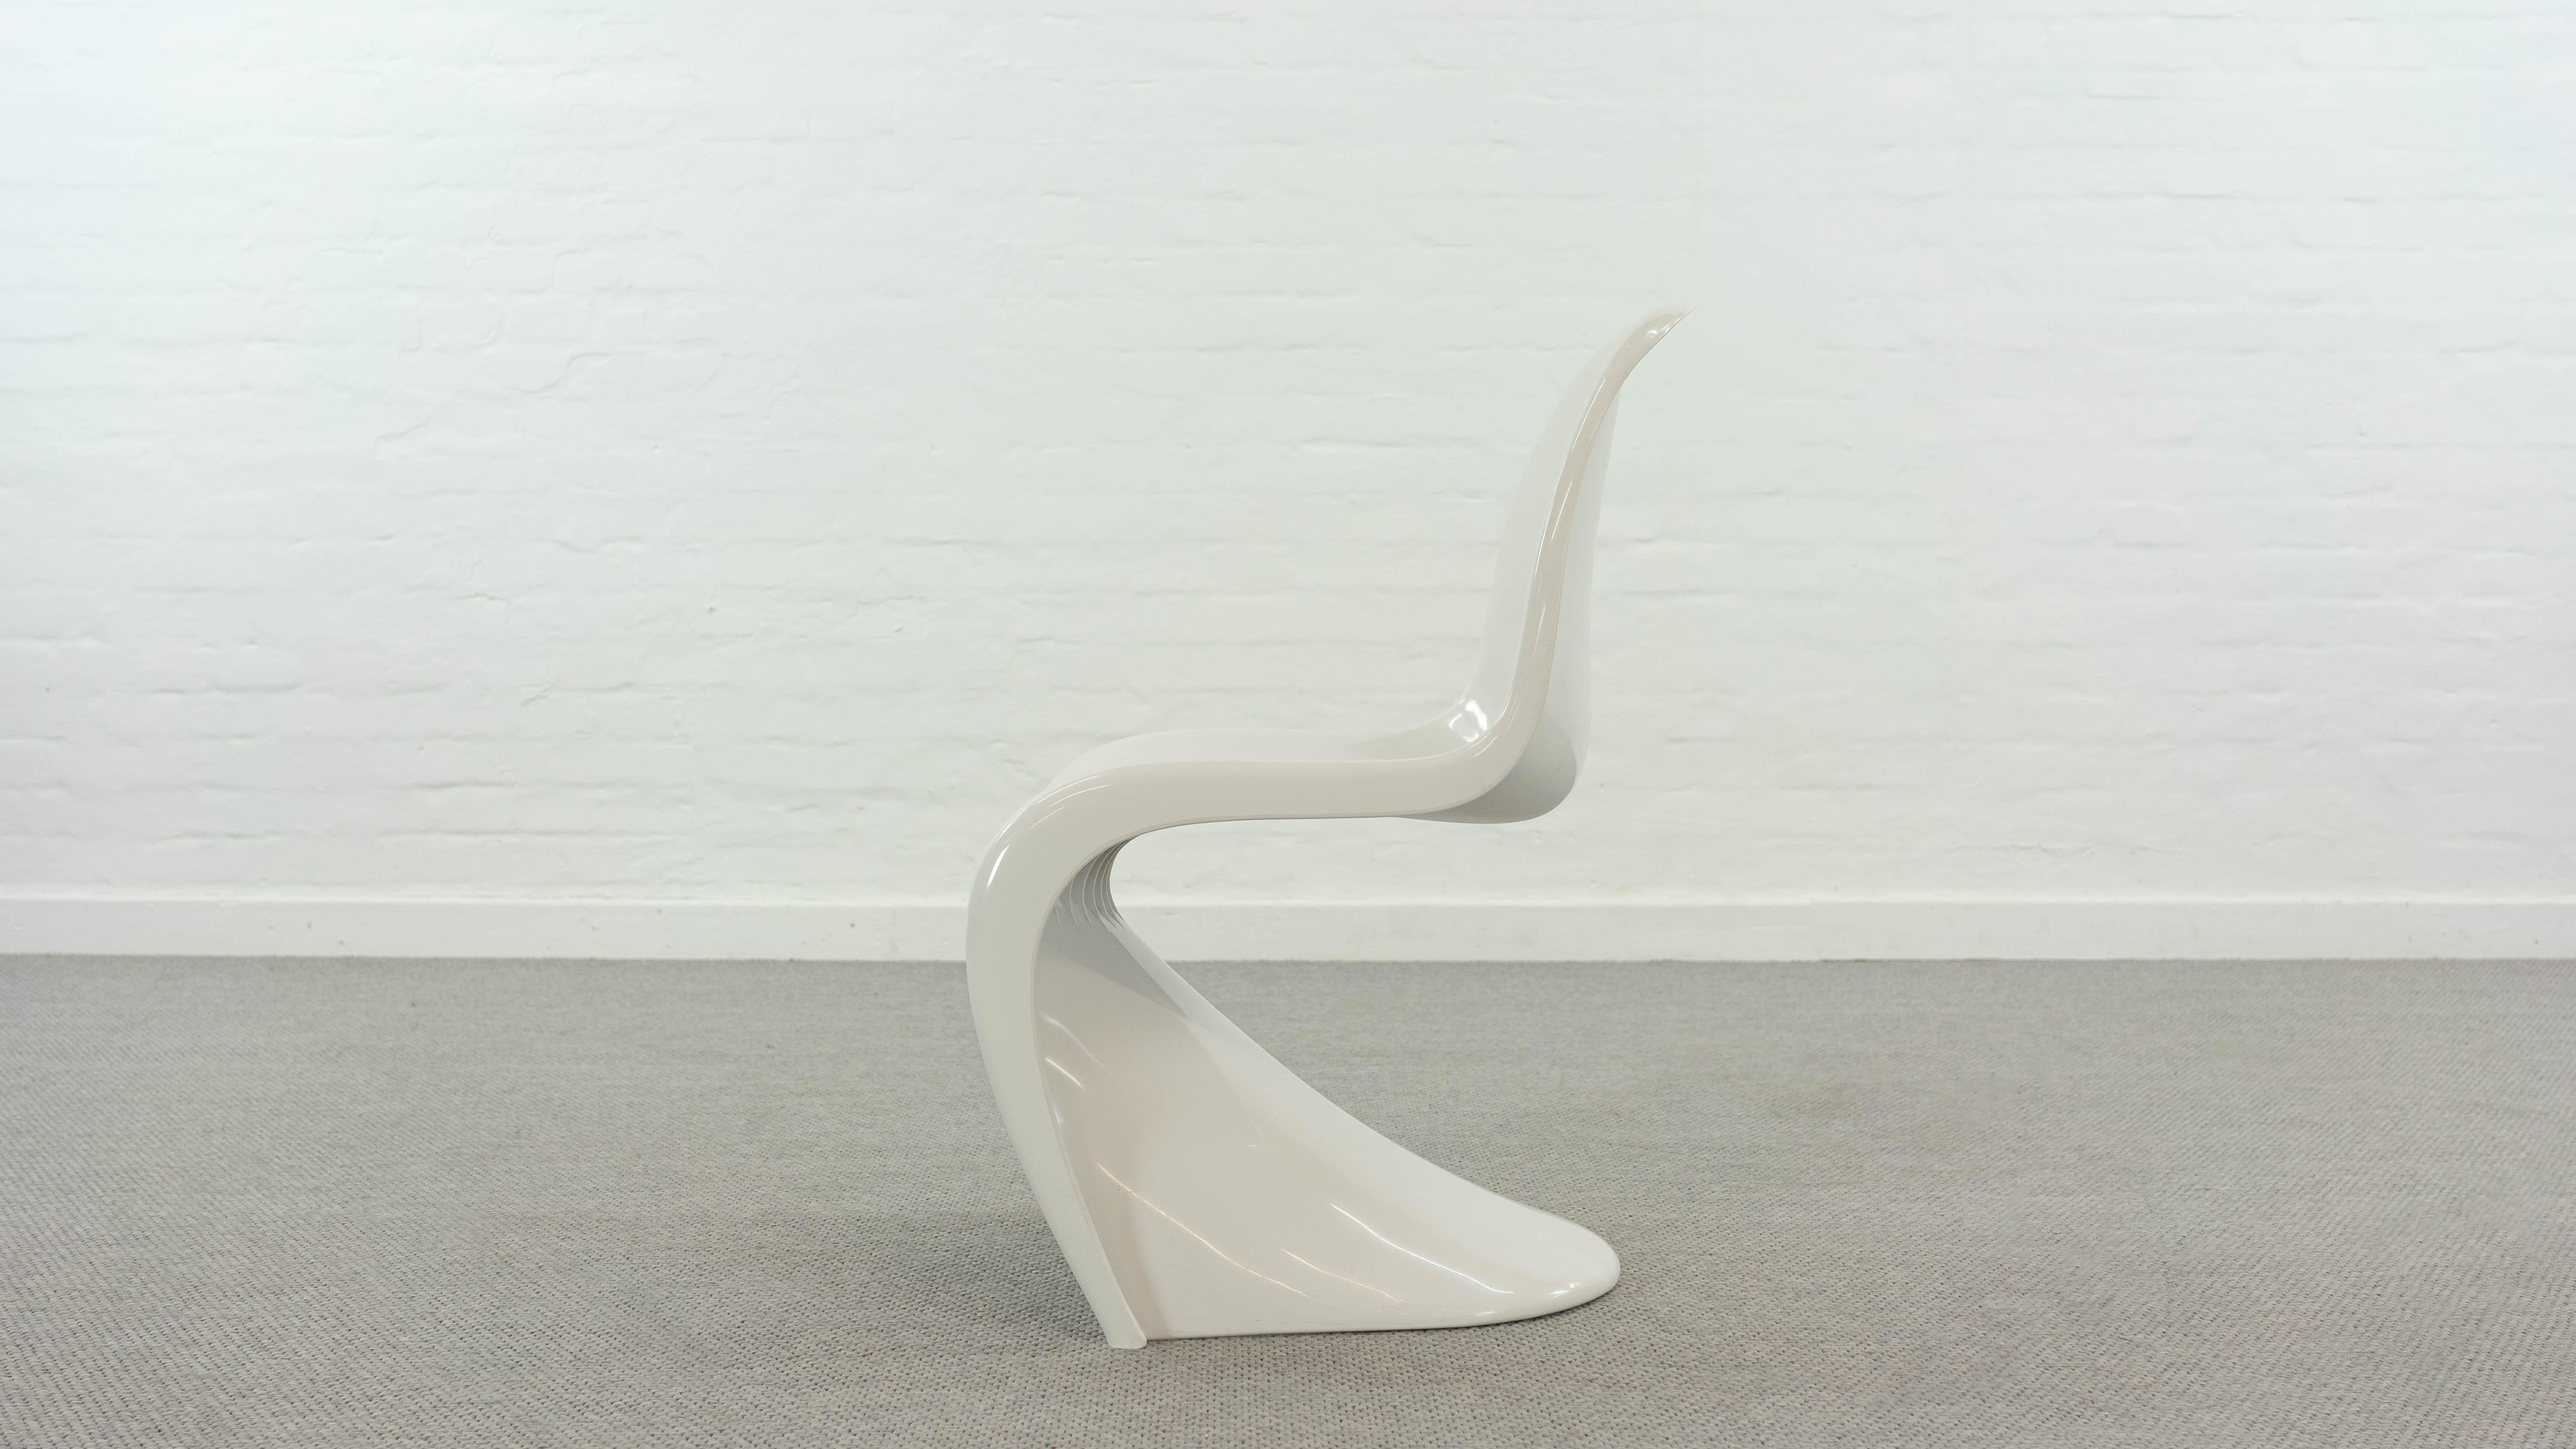 Space Age Panton Chair by Verner Panton for Herman Miller / Fehlbaum, in white 1976 For Sale